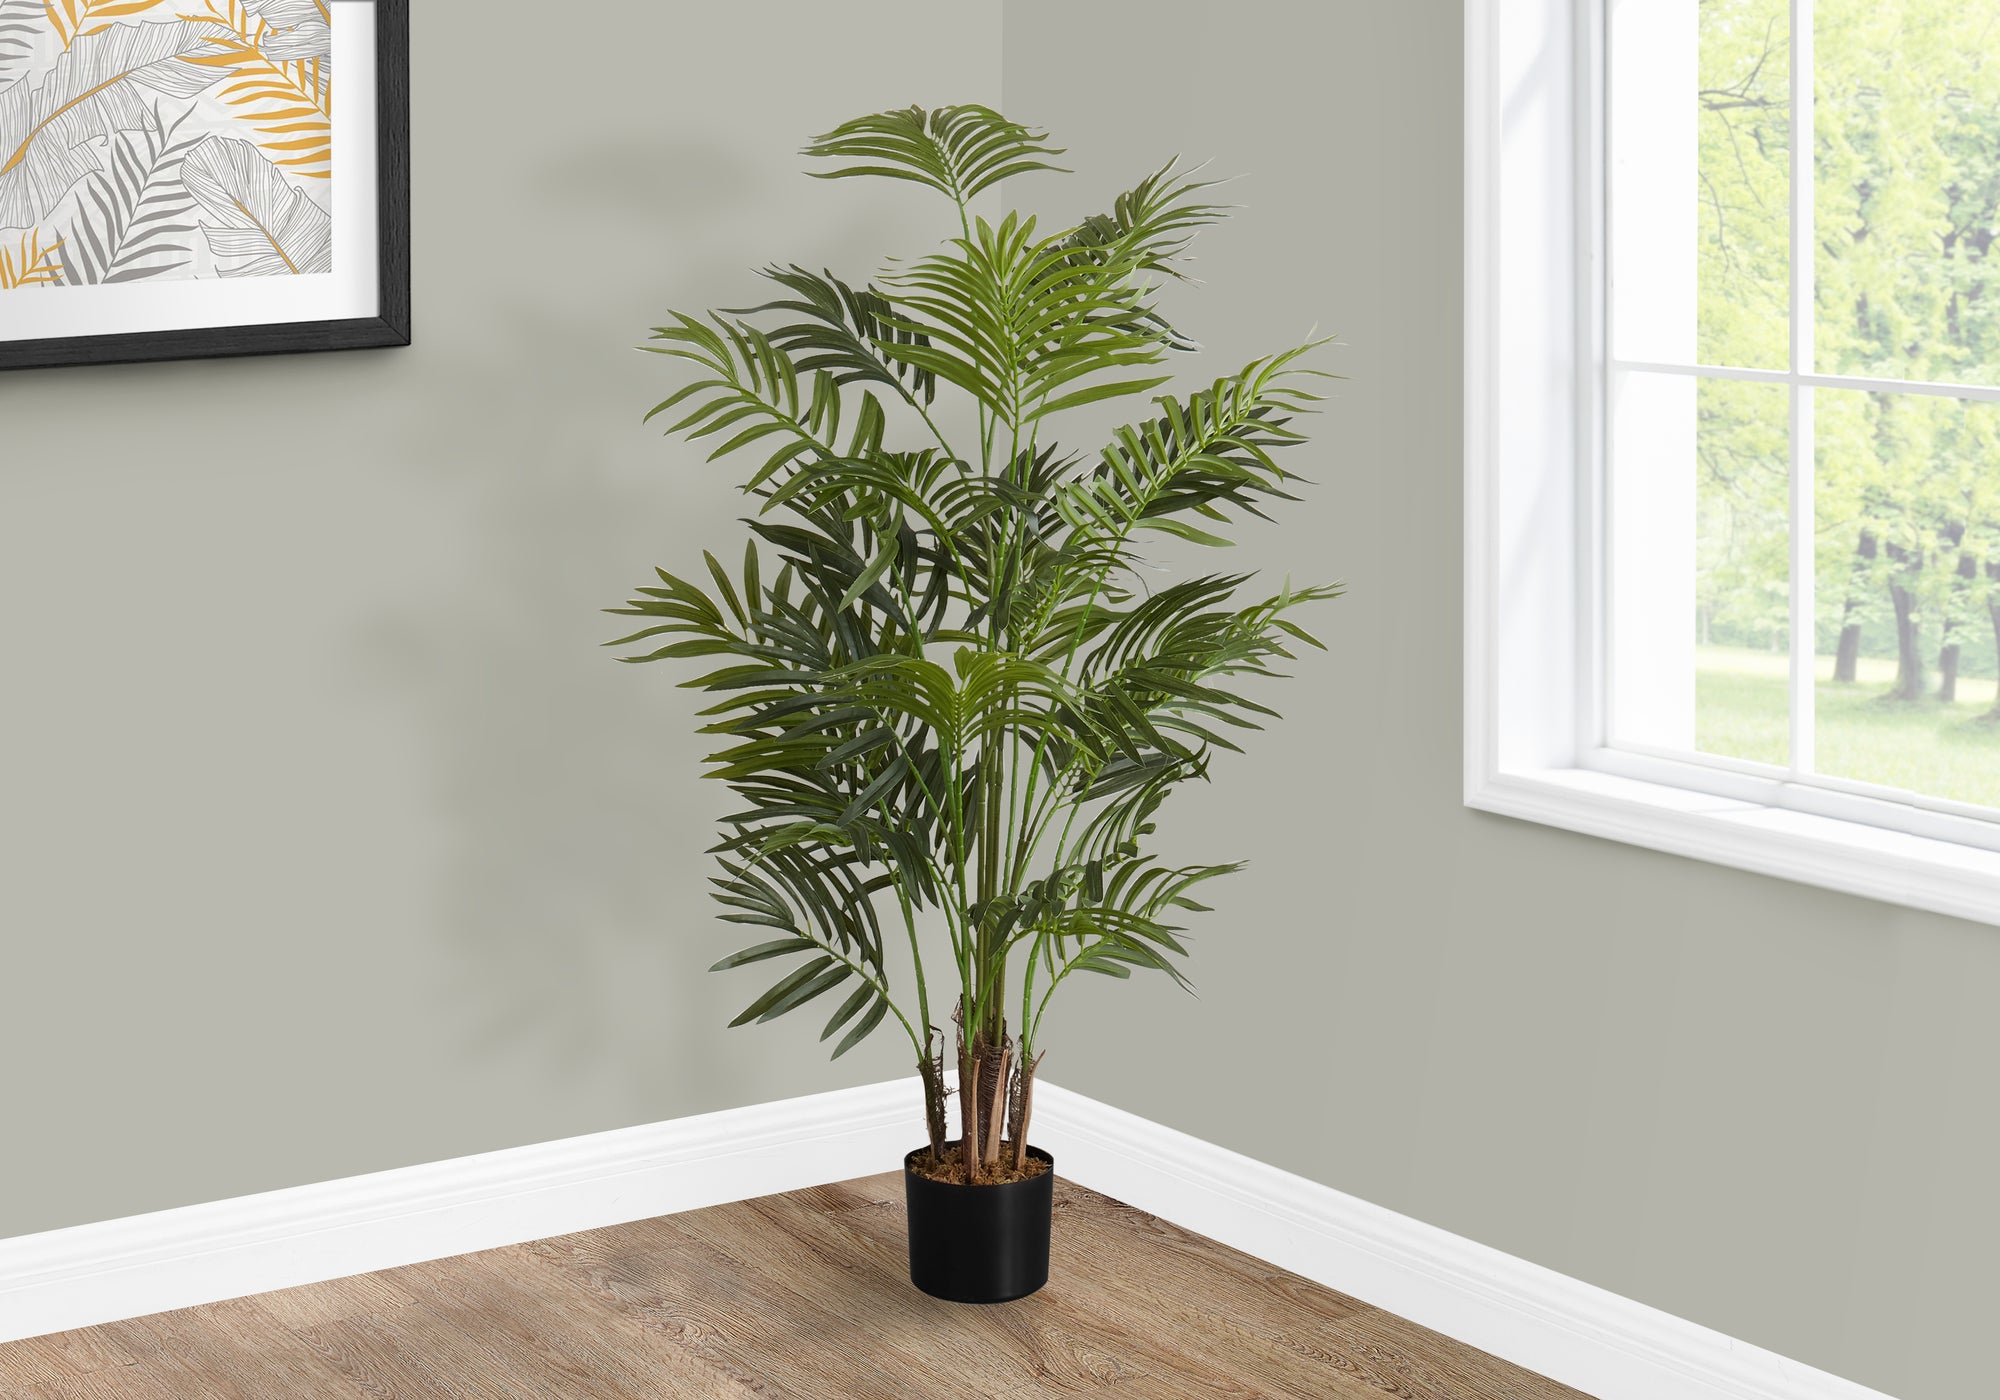 MN-449538    Artificial Plant, 47" Tall, Areca Palm Tree, Indoor, Faux, Fake, Floor, Greenery, Potted, Real Touch, Decorative, Green Leaves, Black Pot